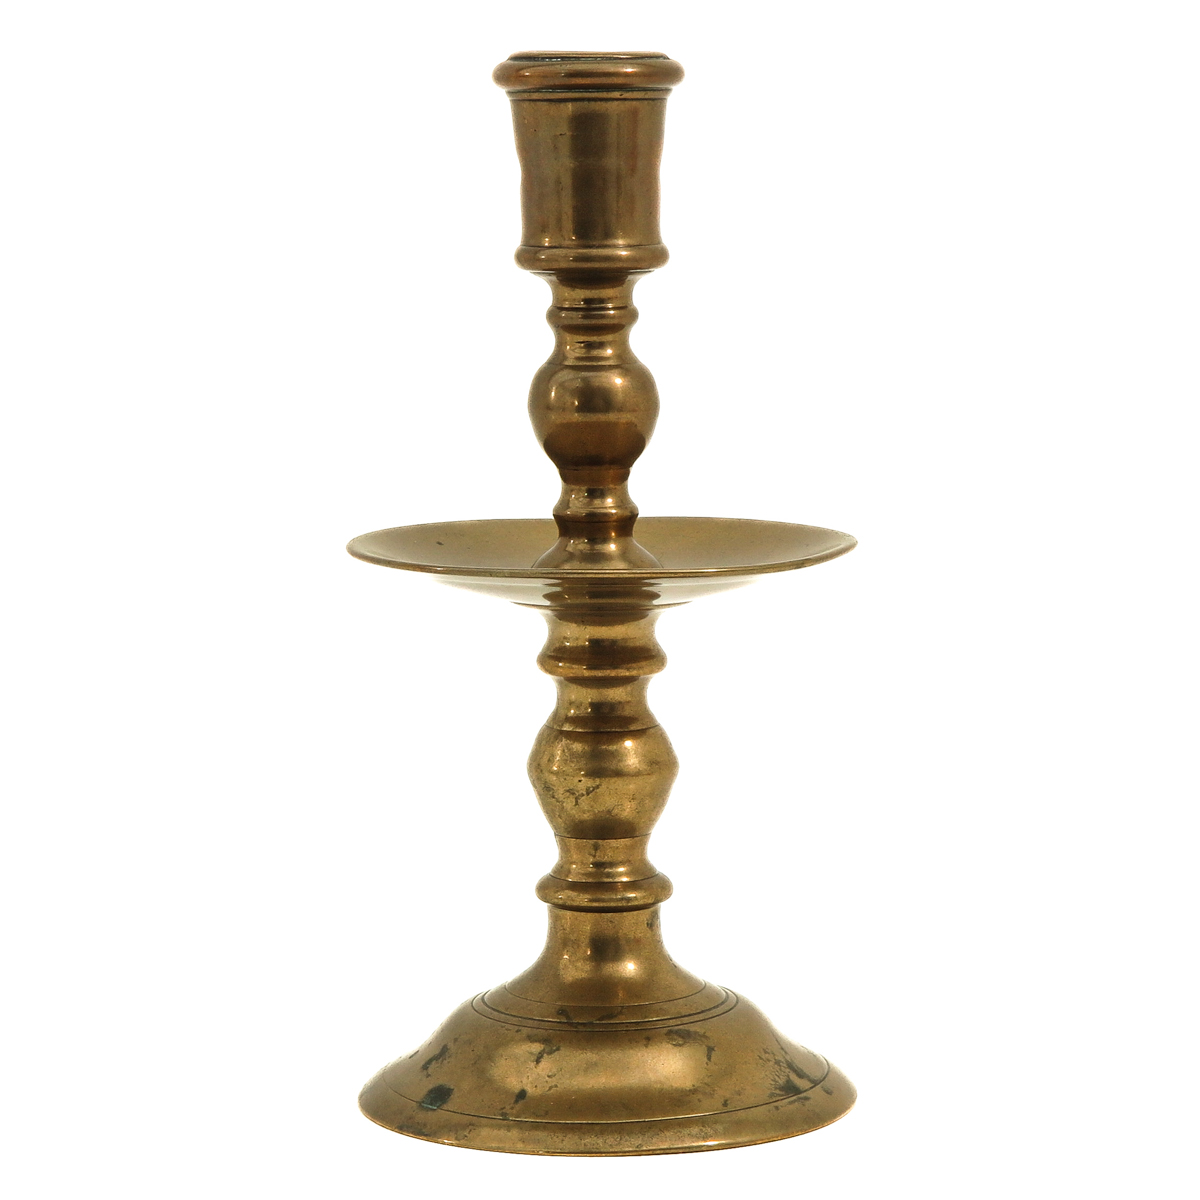 A 17th Century Dutch Candlestick - Image 2 of 8